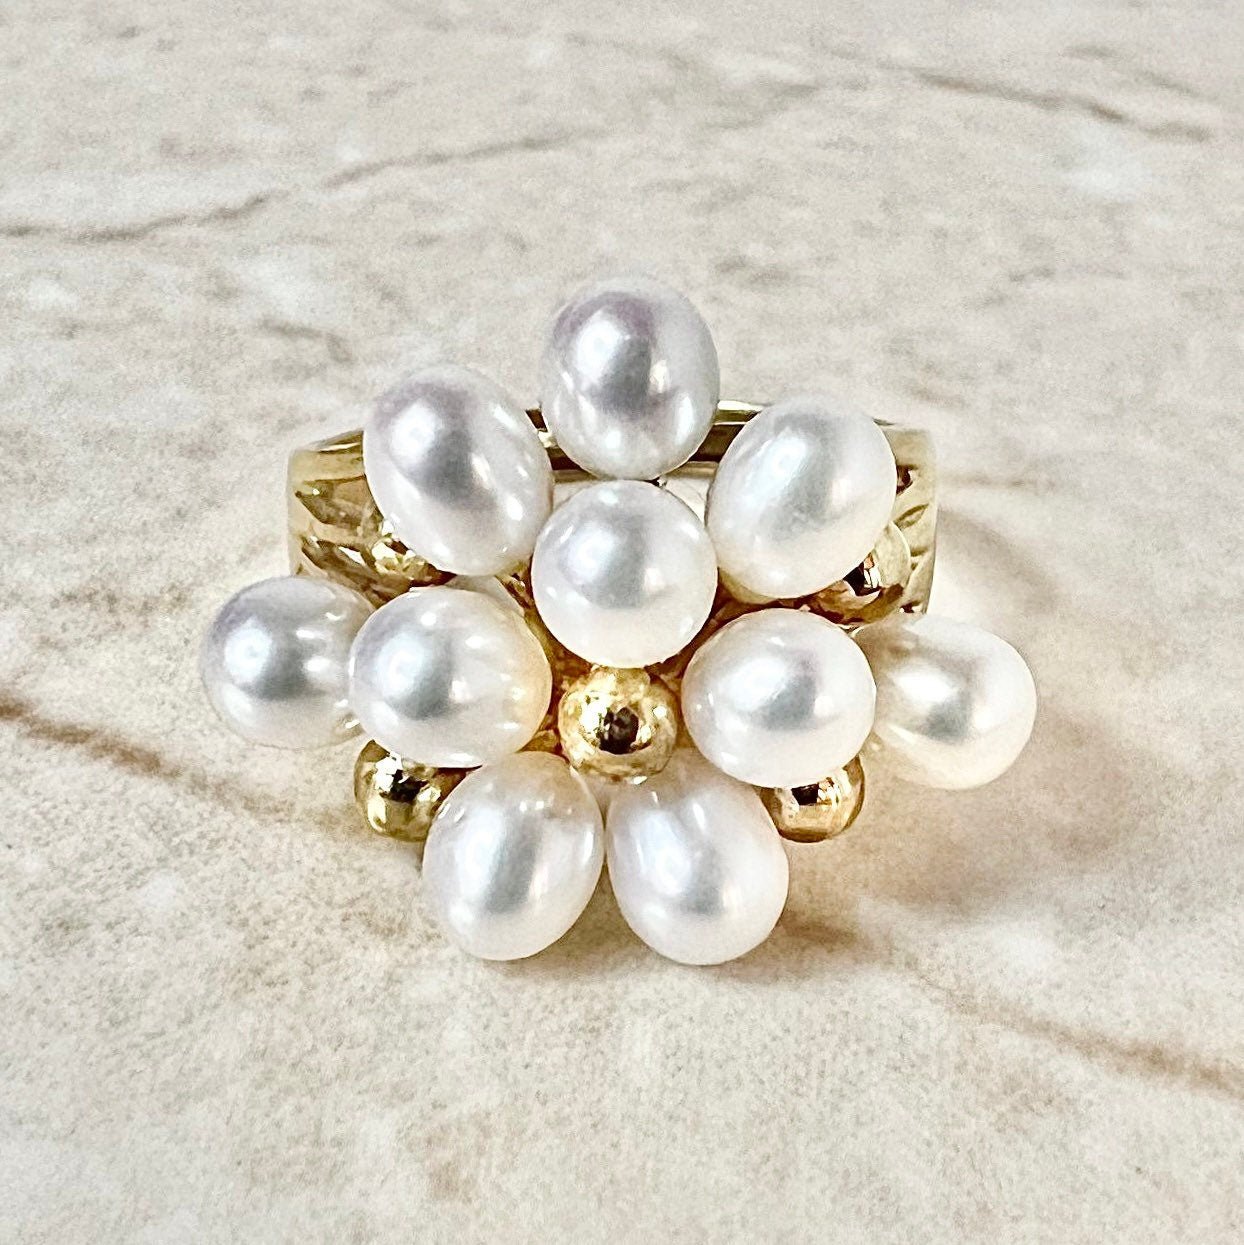 18K Vintage Pearl Ring - 18 Karat Yellow Gold Pearl Cocktail Ring - Gold Pearl Ring - Vintage Rings - Birthday Gift - Best Gifts For Her